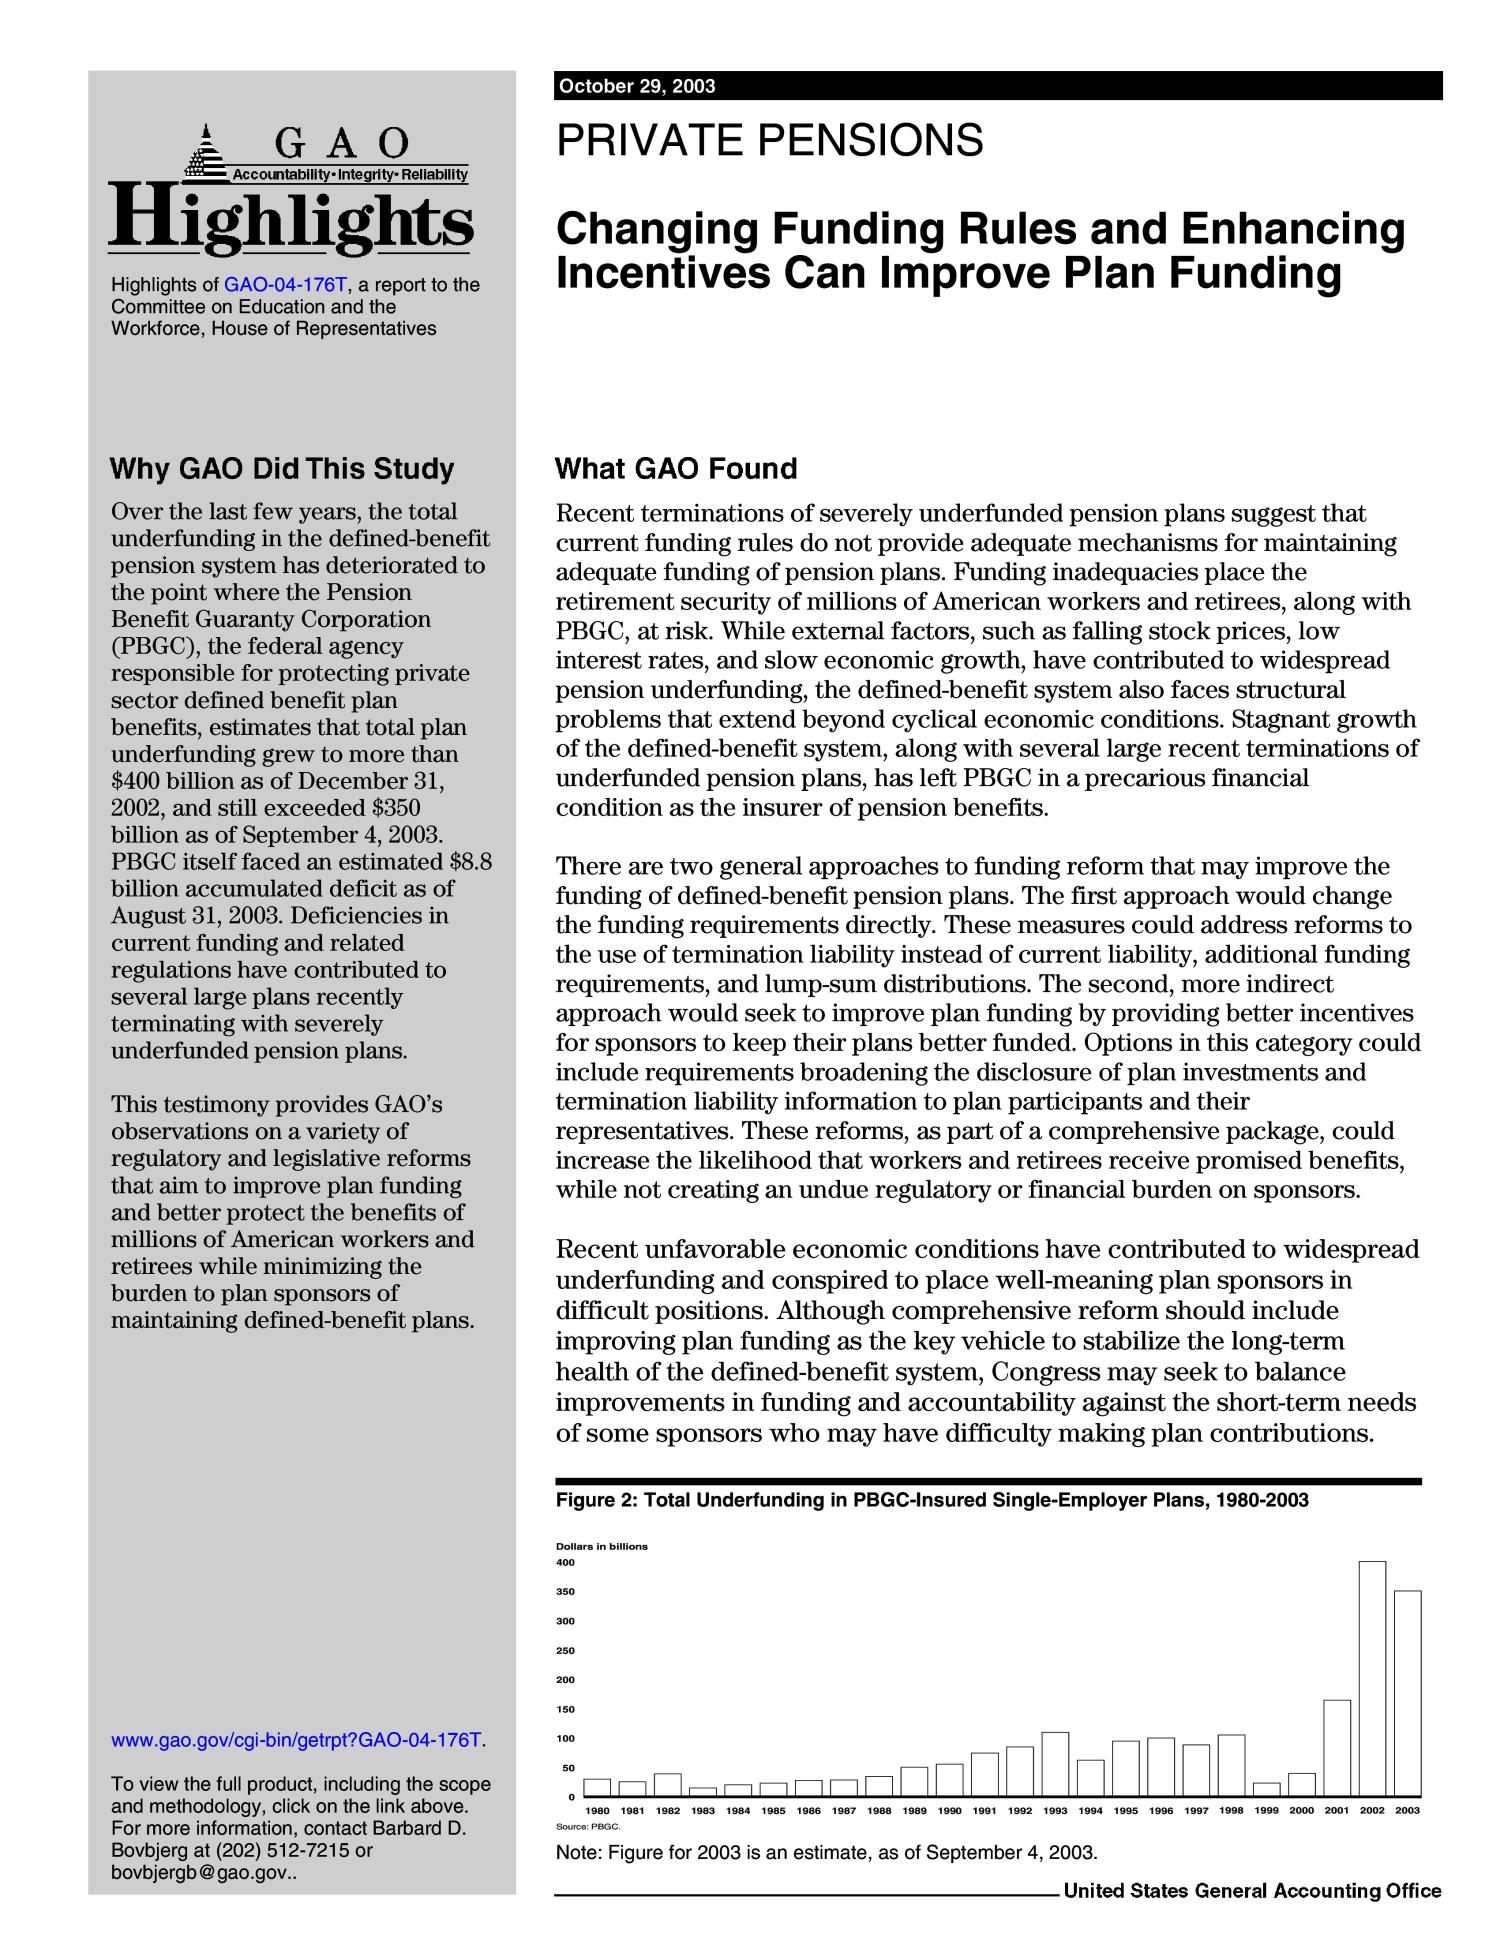 Private Pensions: Changing Funding Rules and Enhancing Incentives Can Improve Plan Funding
                                                
                                                    [Sequence #]: 2 of 25
                                                